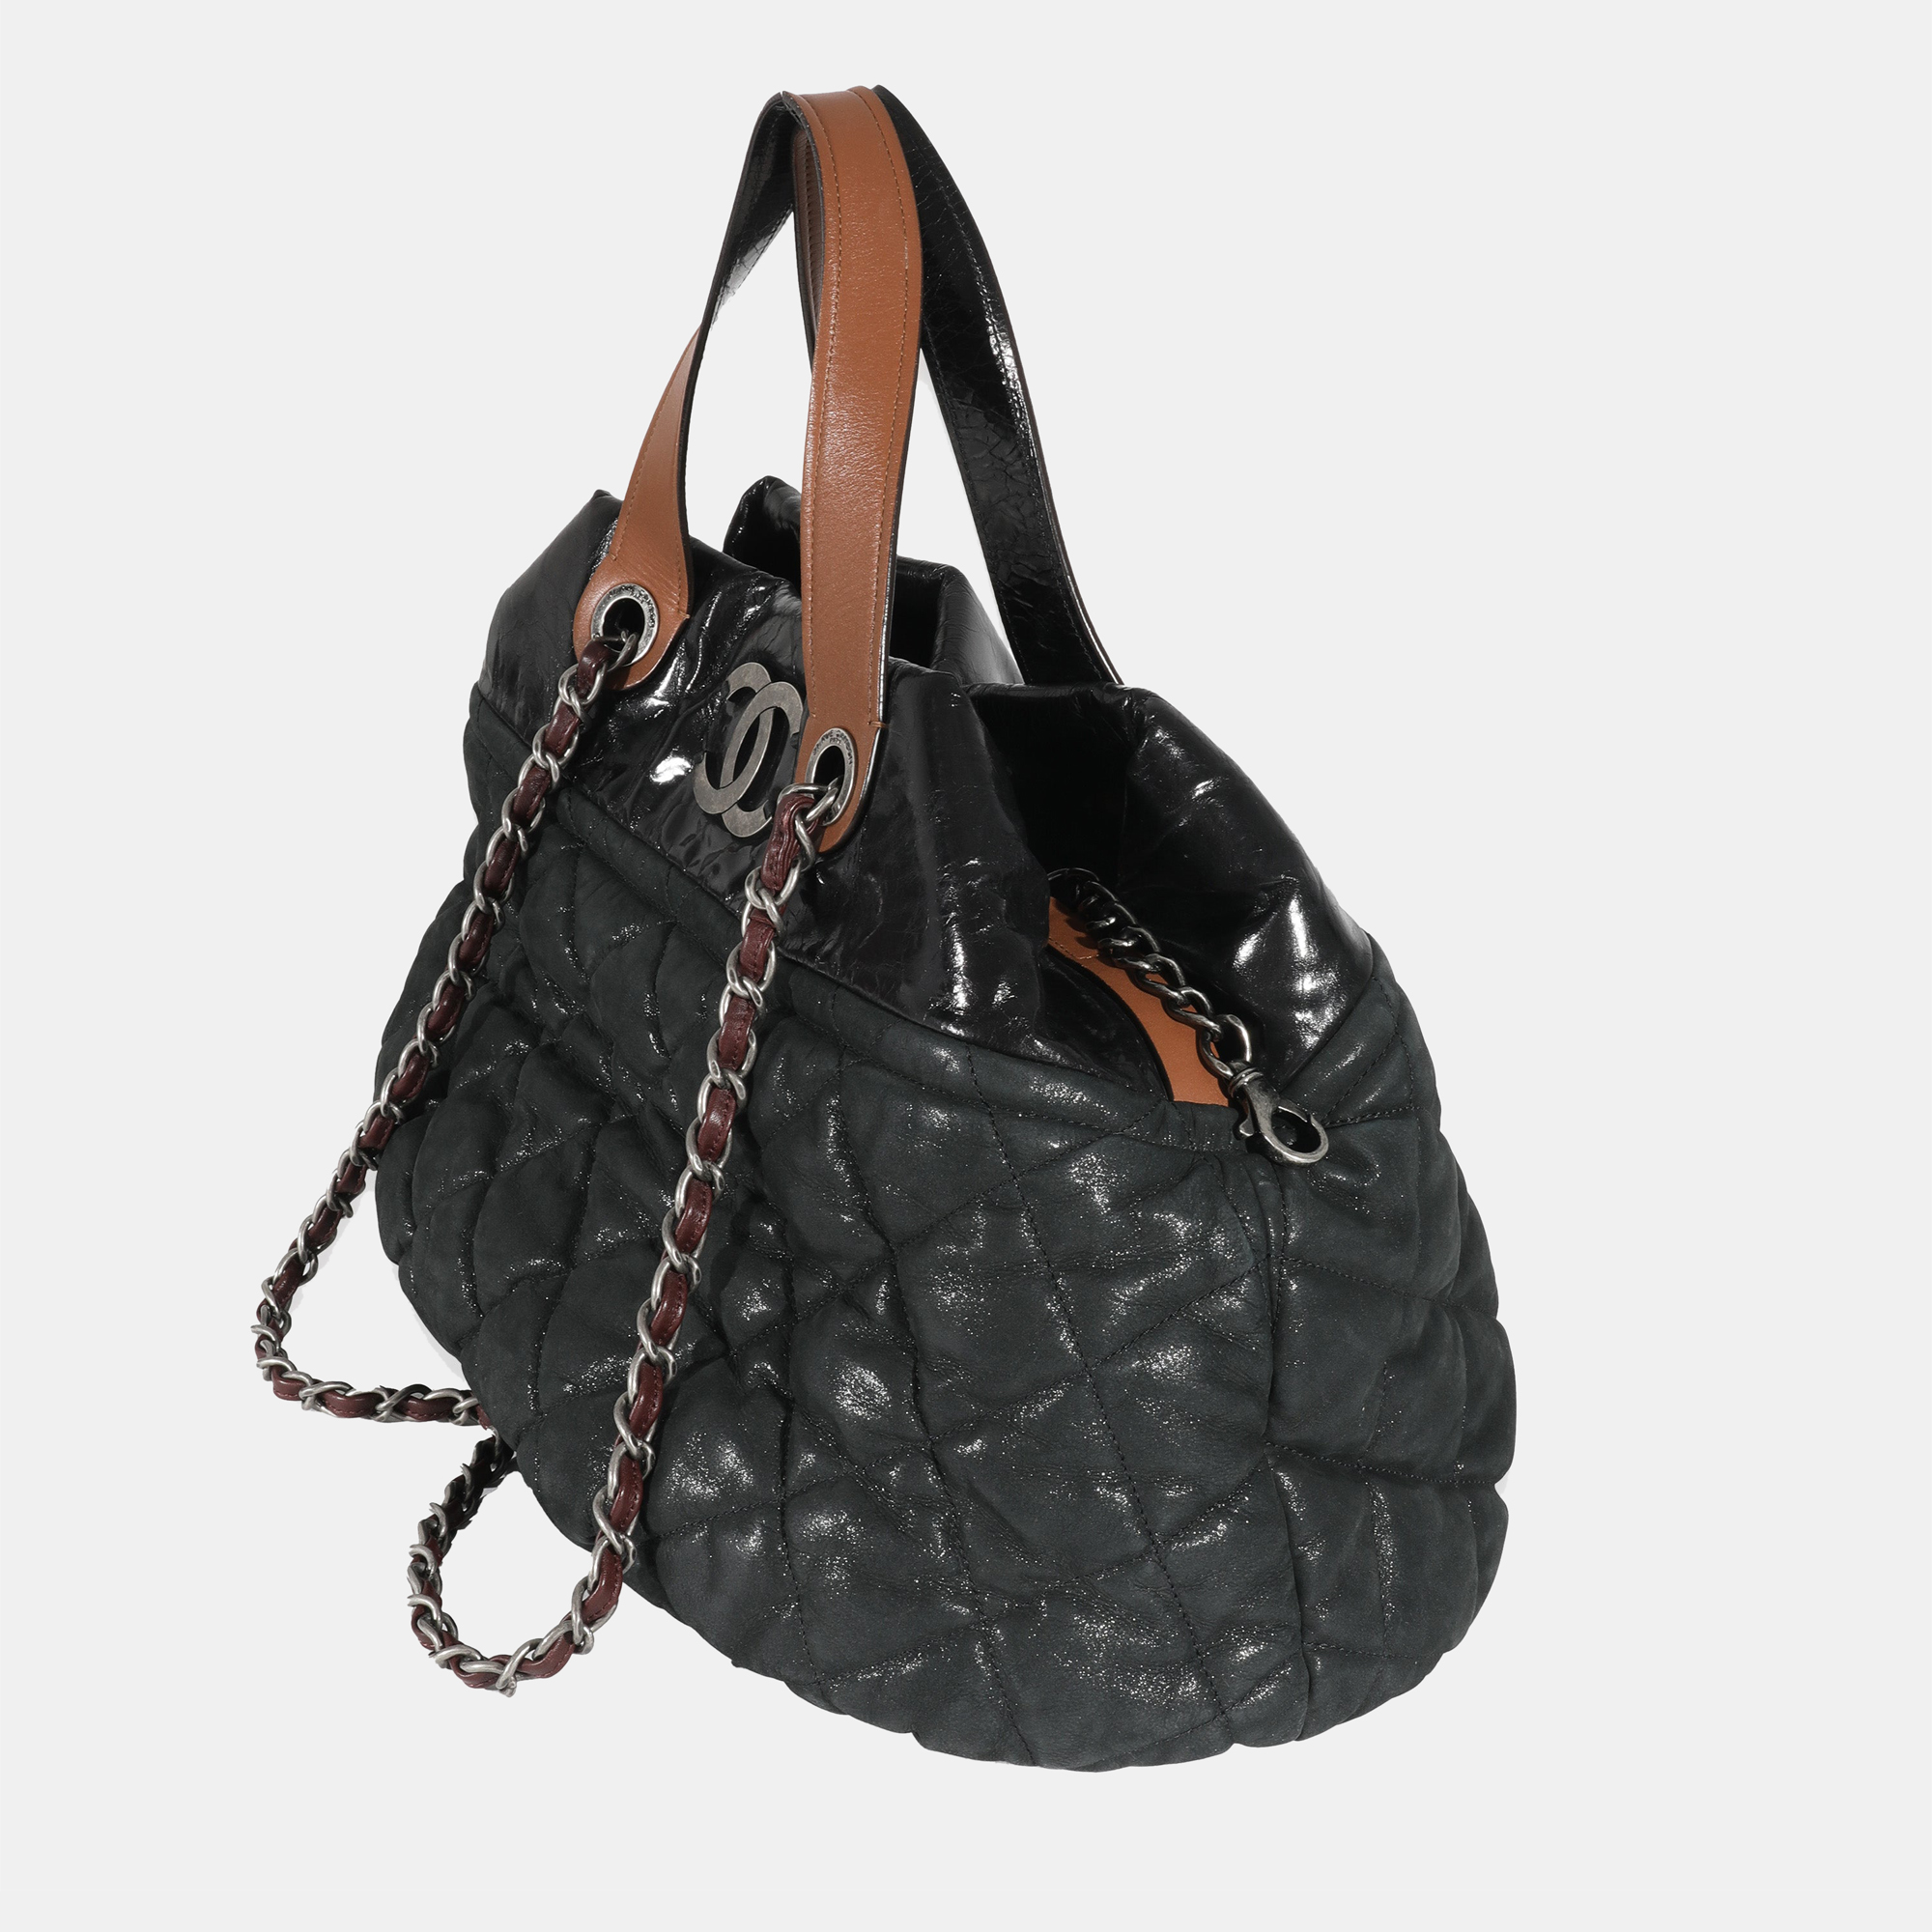 

Chanel Black Iridescent Calfskin Quilted Leather In The Mix Tote Bag